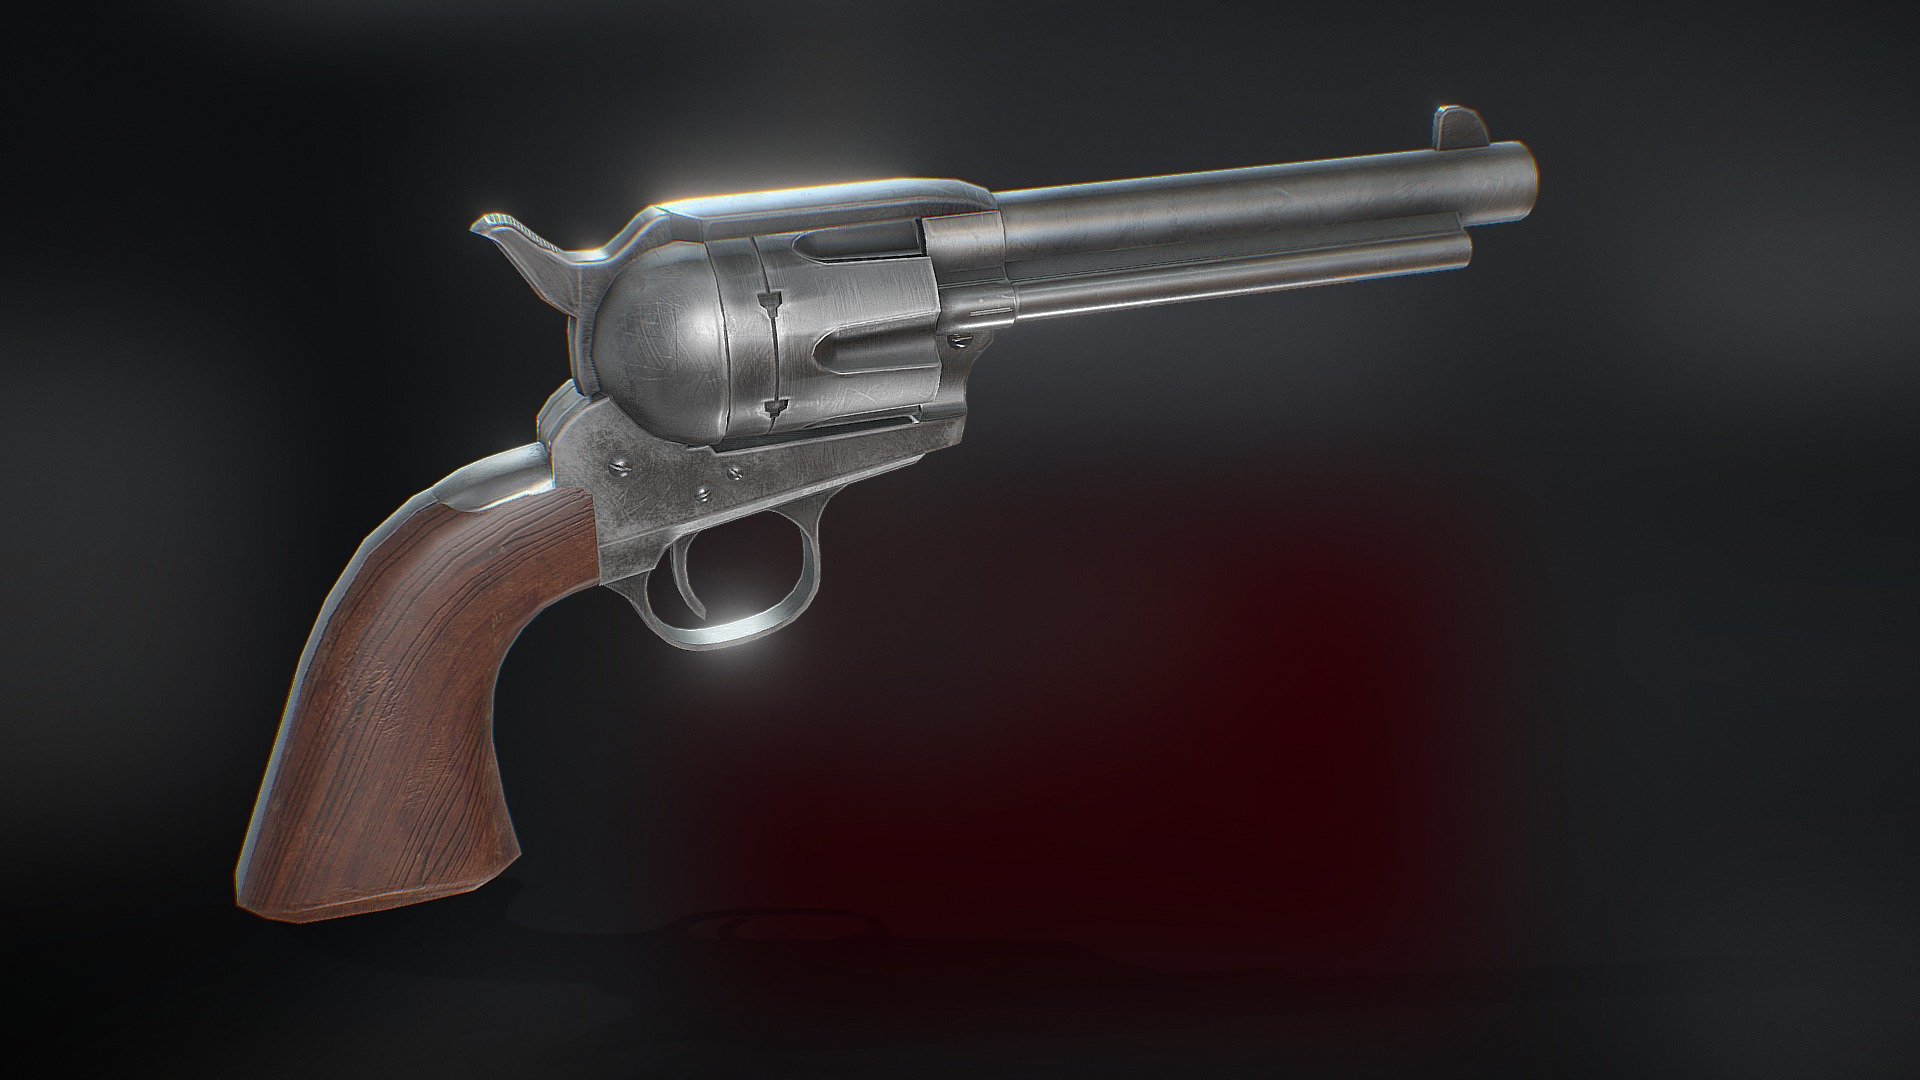 A Cattleman revolver pistol made for my uni course. Inspired heavily on the one seen in Red Dead Redemption 2 3d model